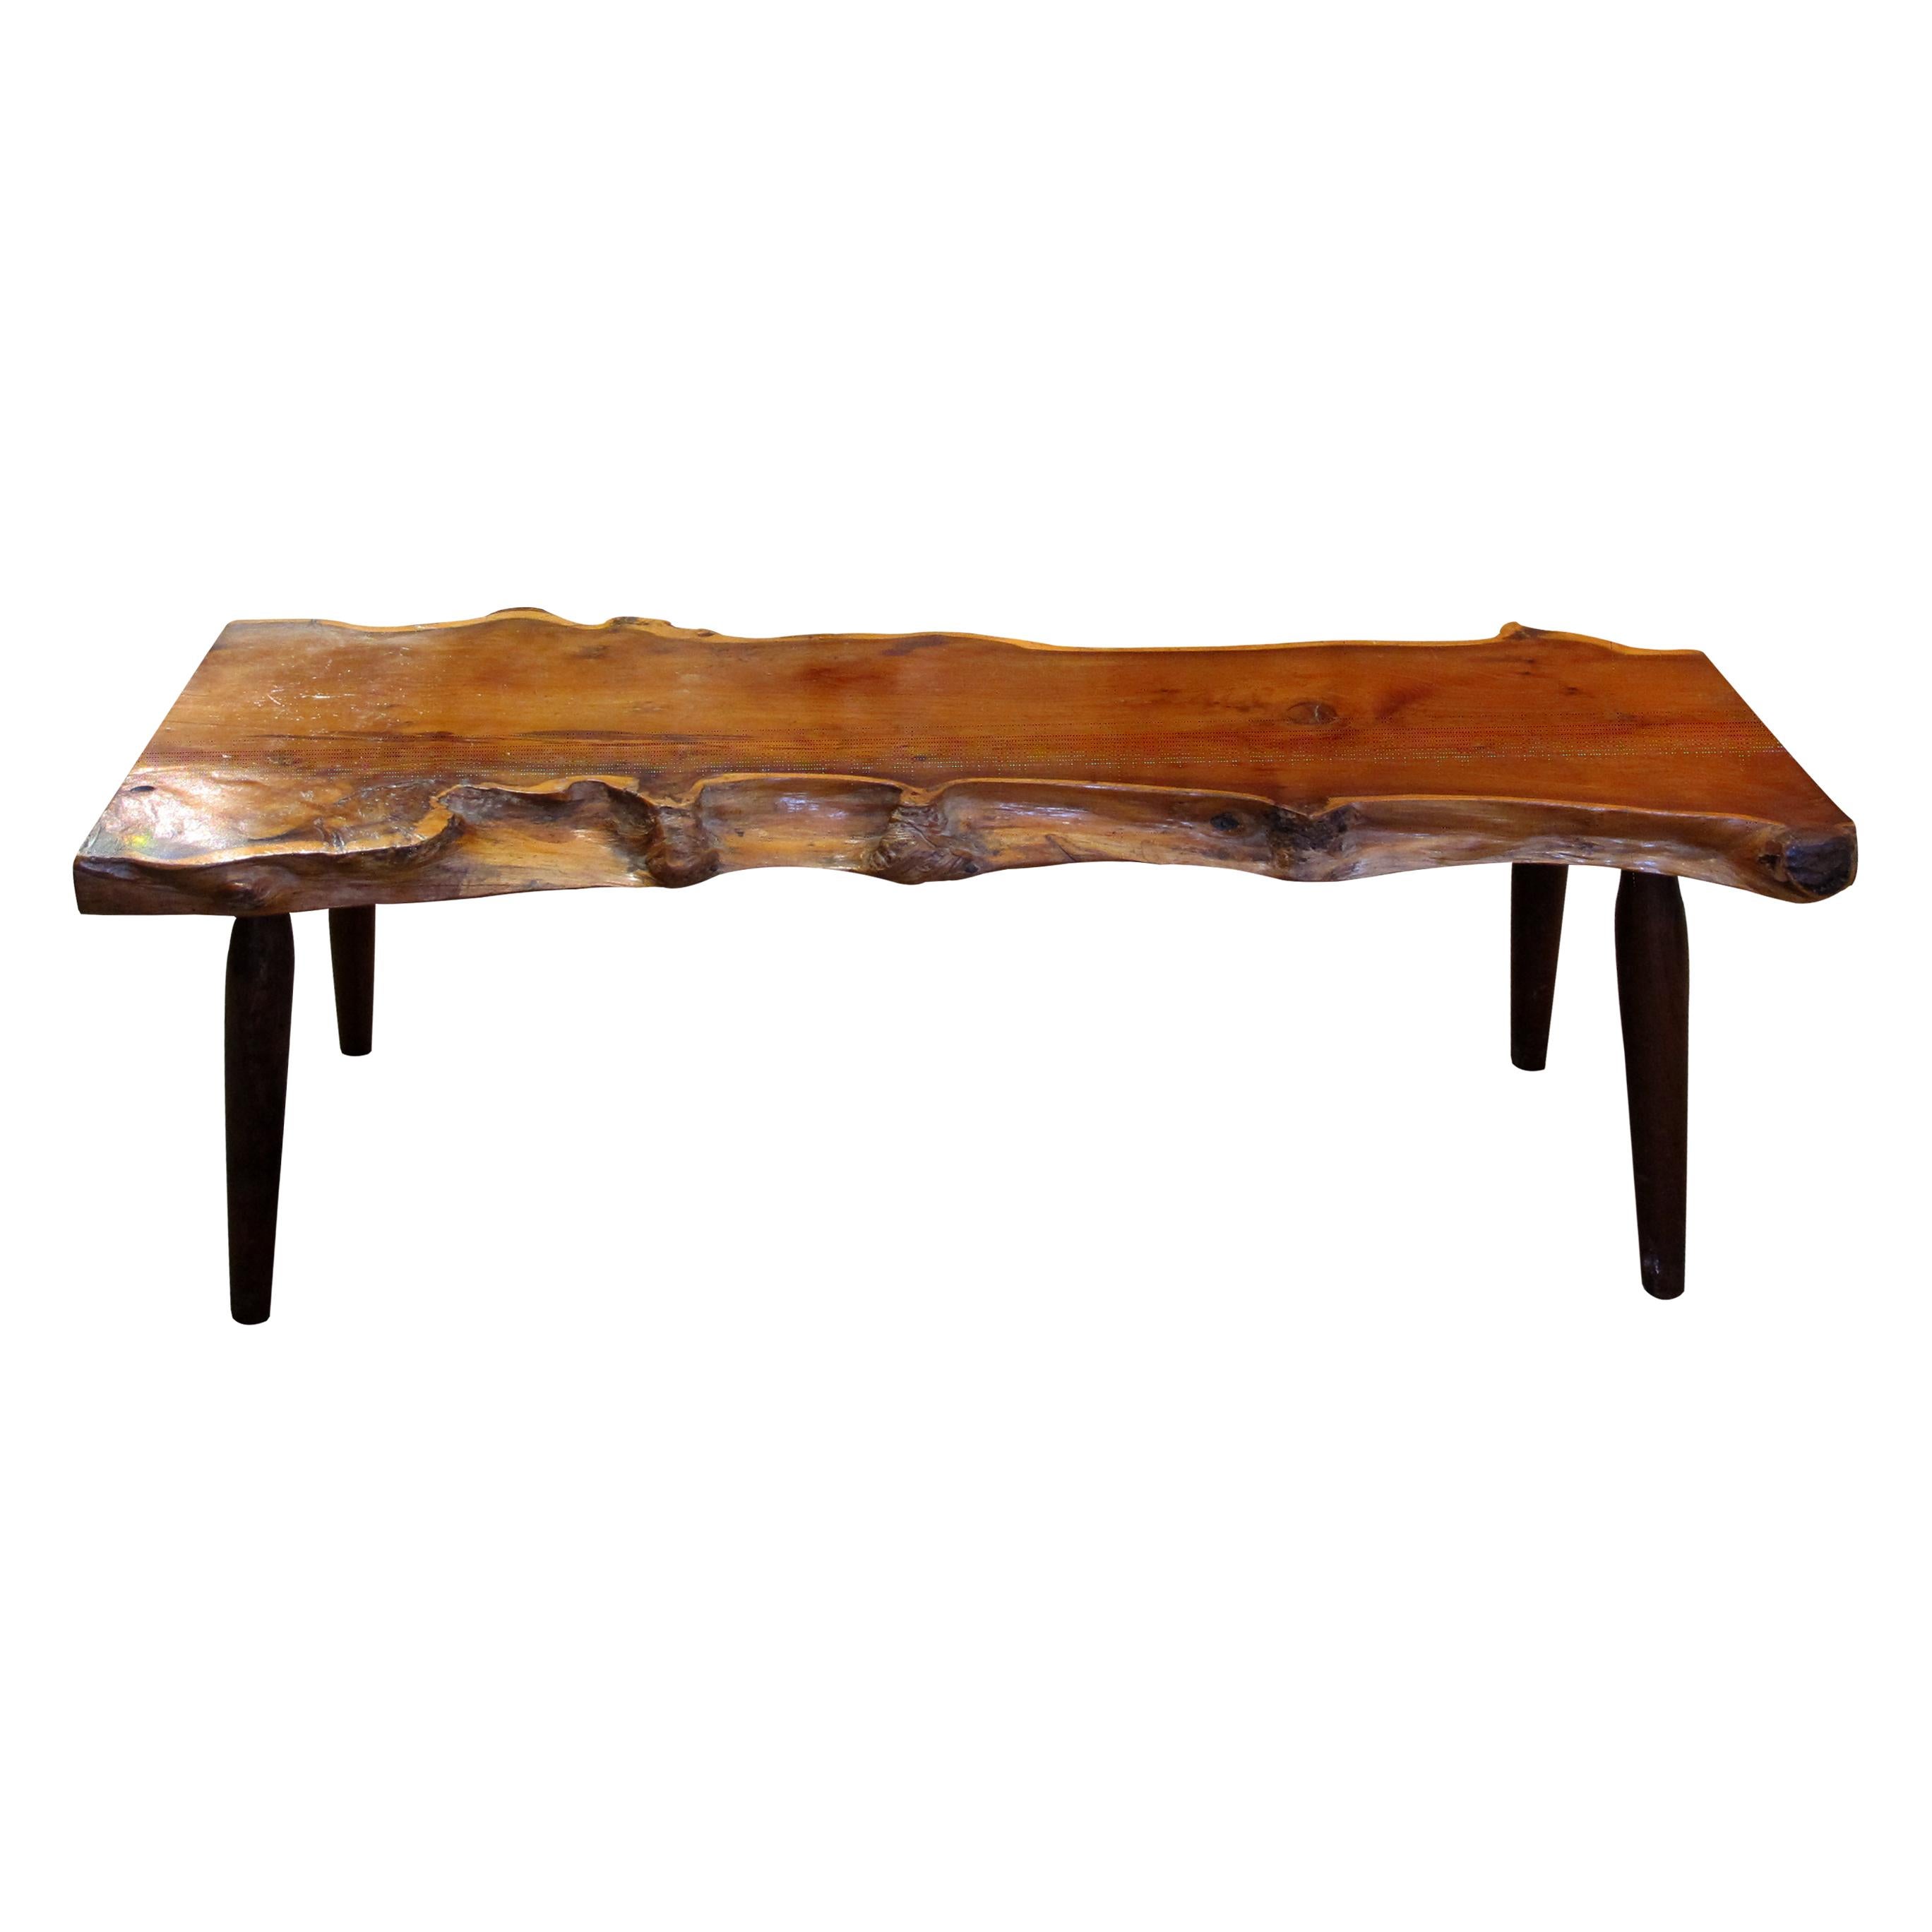 Mid-Century Modern 1960s Live Edge Yew Wood Bench Attributed to Reynolds Of Ludlow, English For Sale